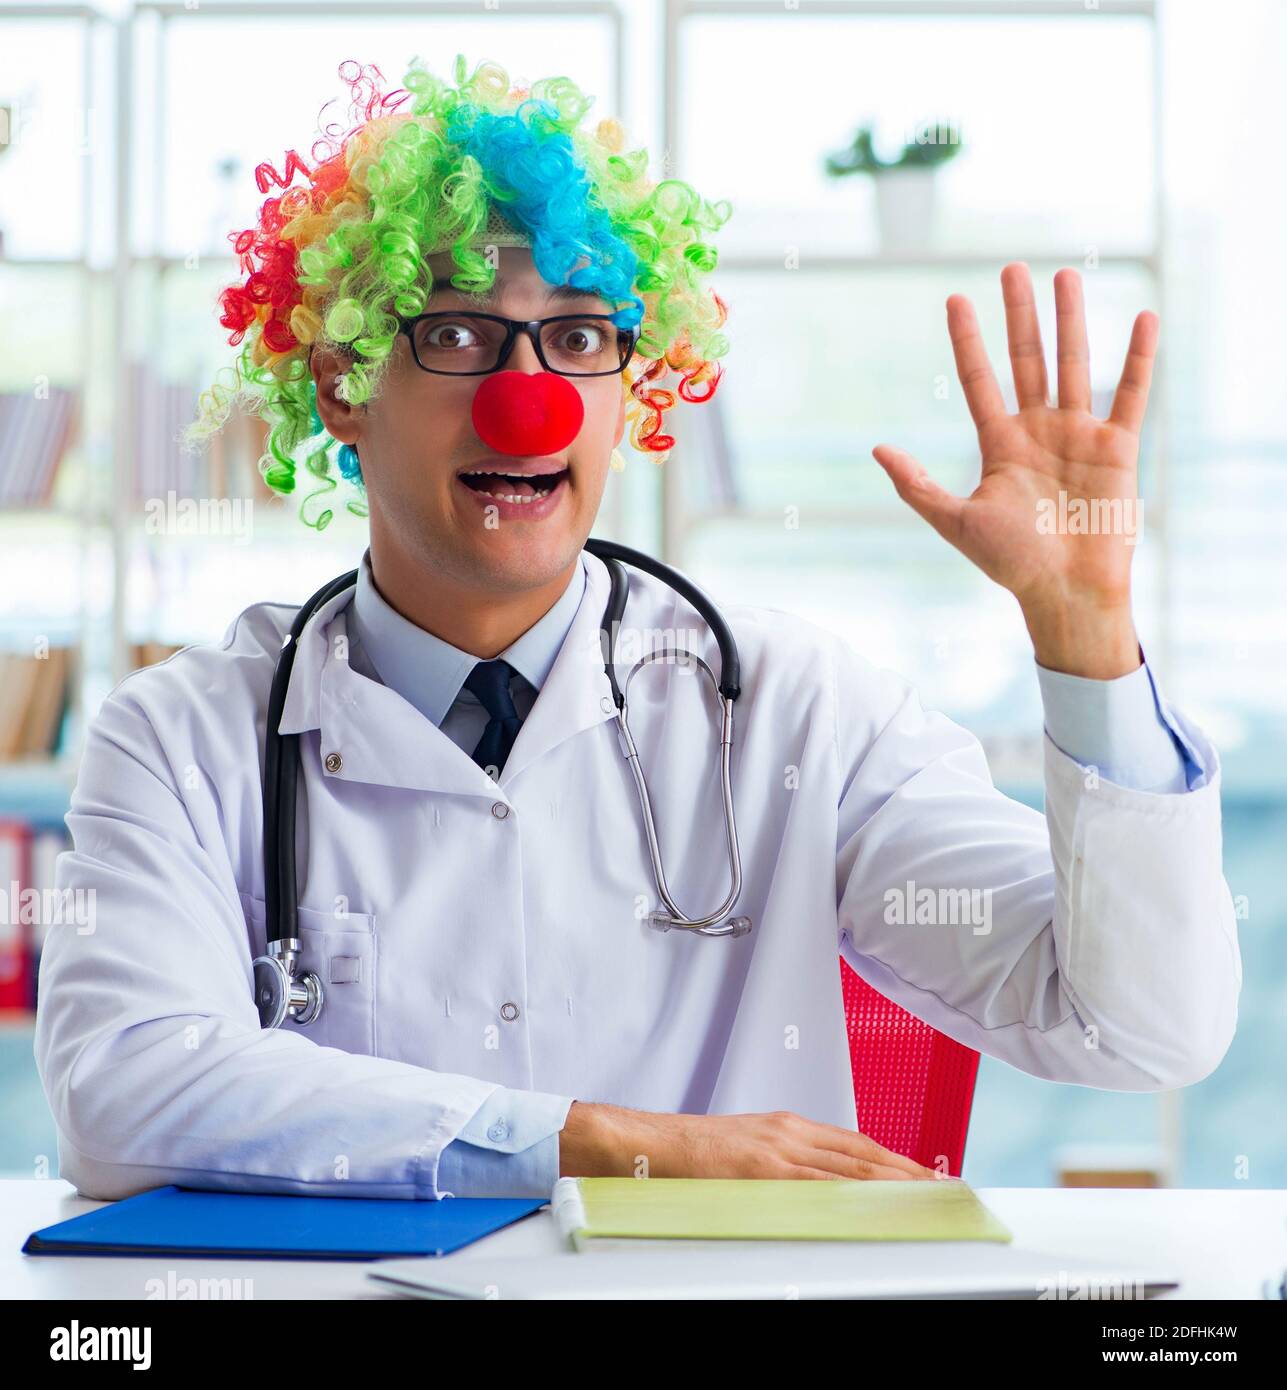 the-funny-pediatrician-with-clown-wig-in-the-hospital-clinic-2DFHK4W.jpg